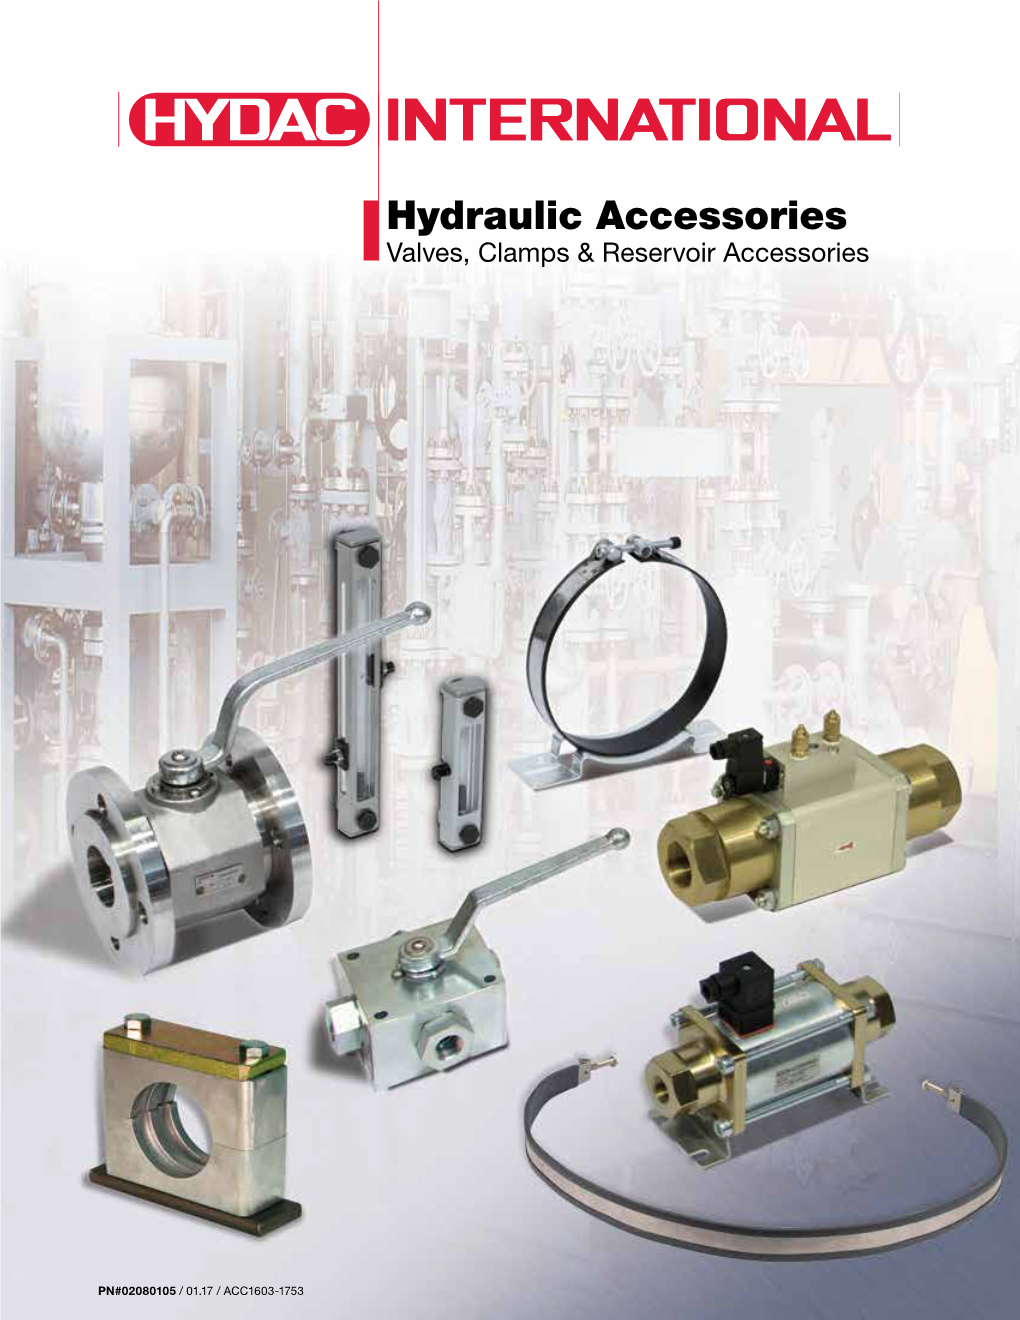 Hydraulic Accessories Valves, Clamps & Reservoir Accessories